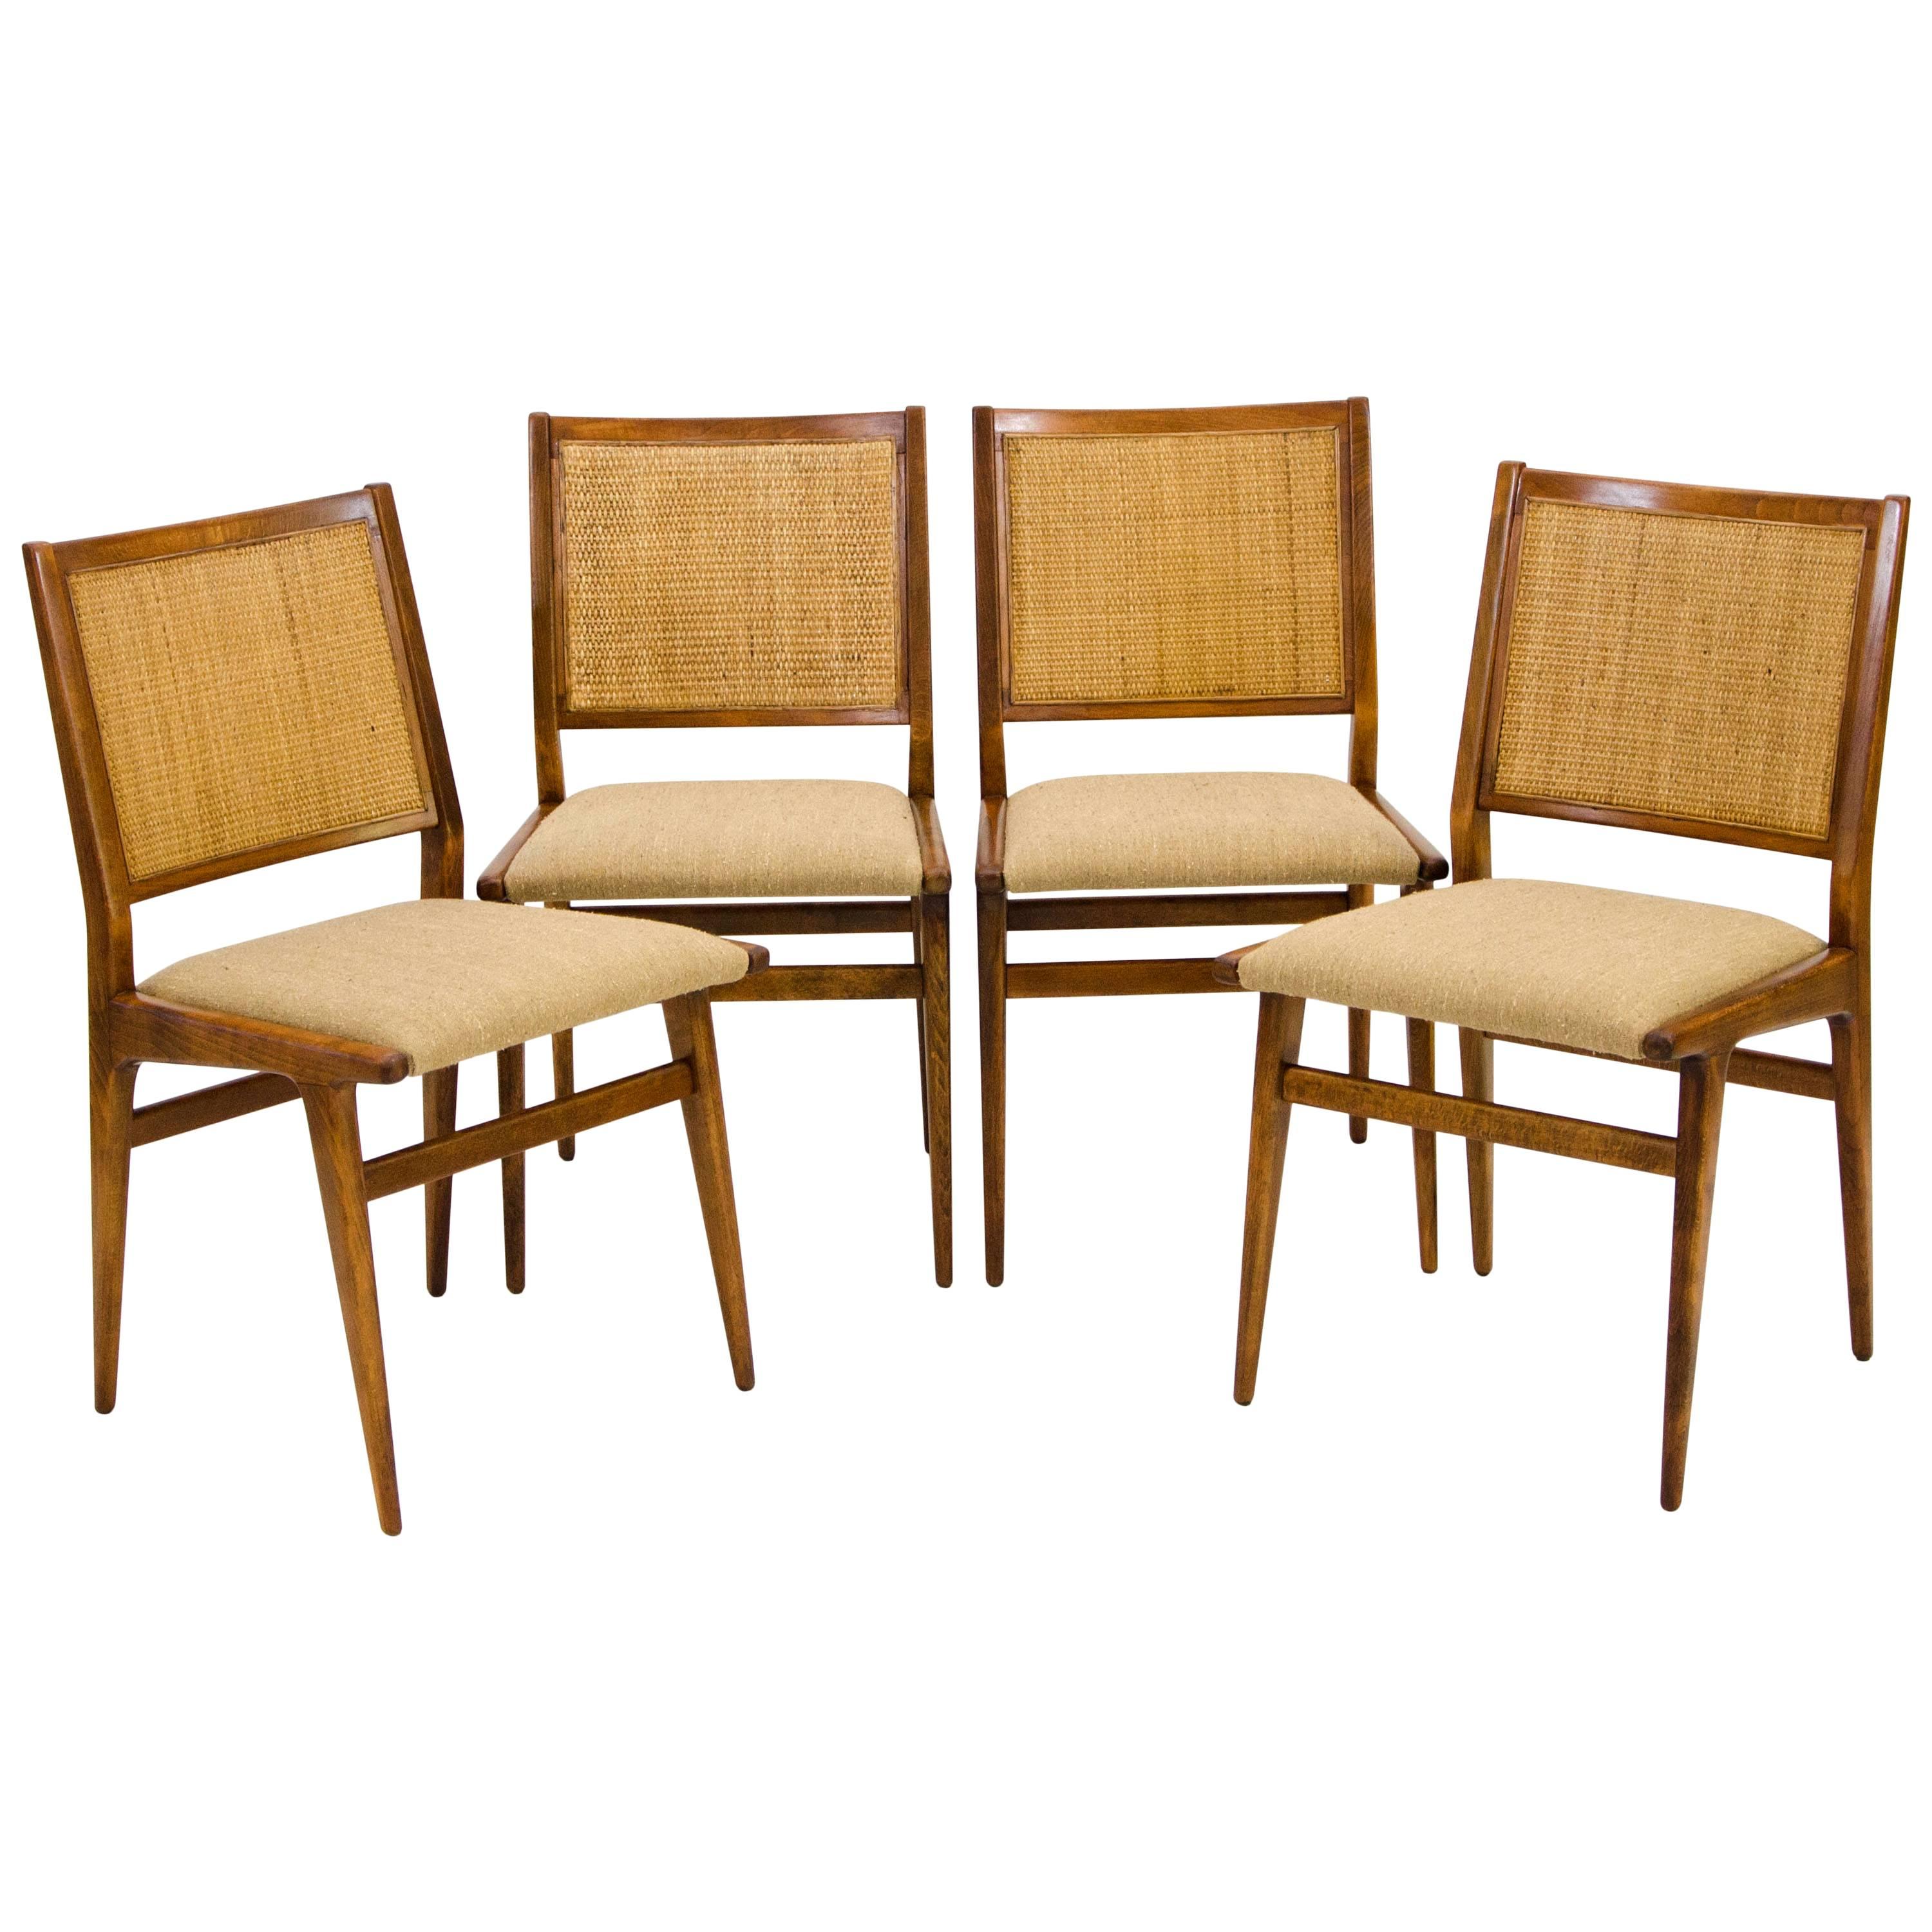 Early Set of Four Jens Risom Dining Chairs with Caned Backs